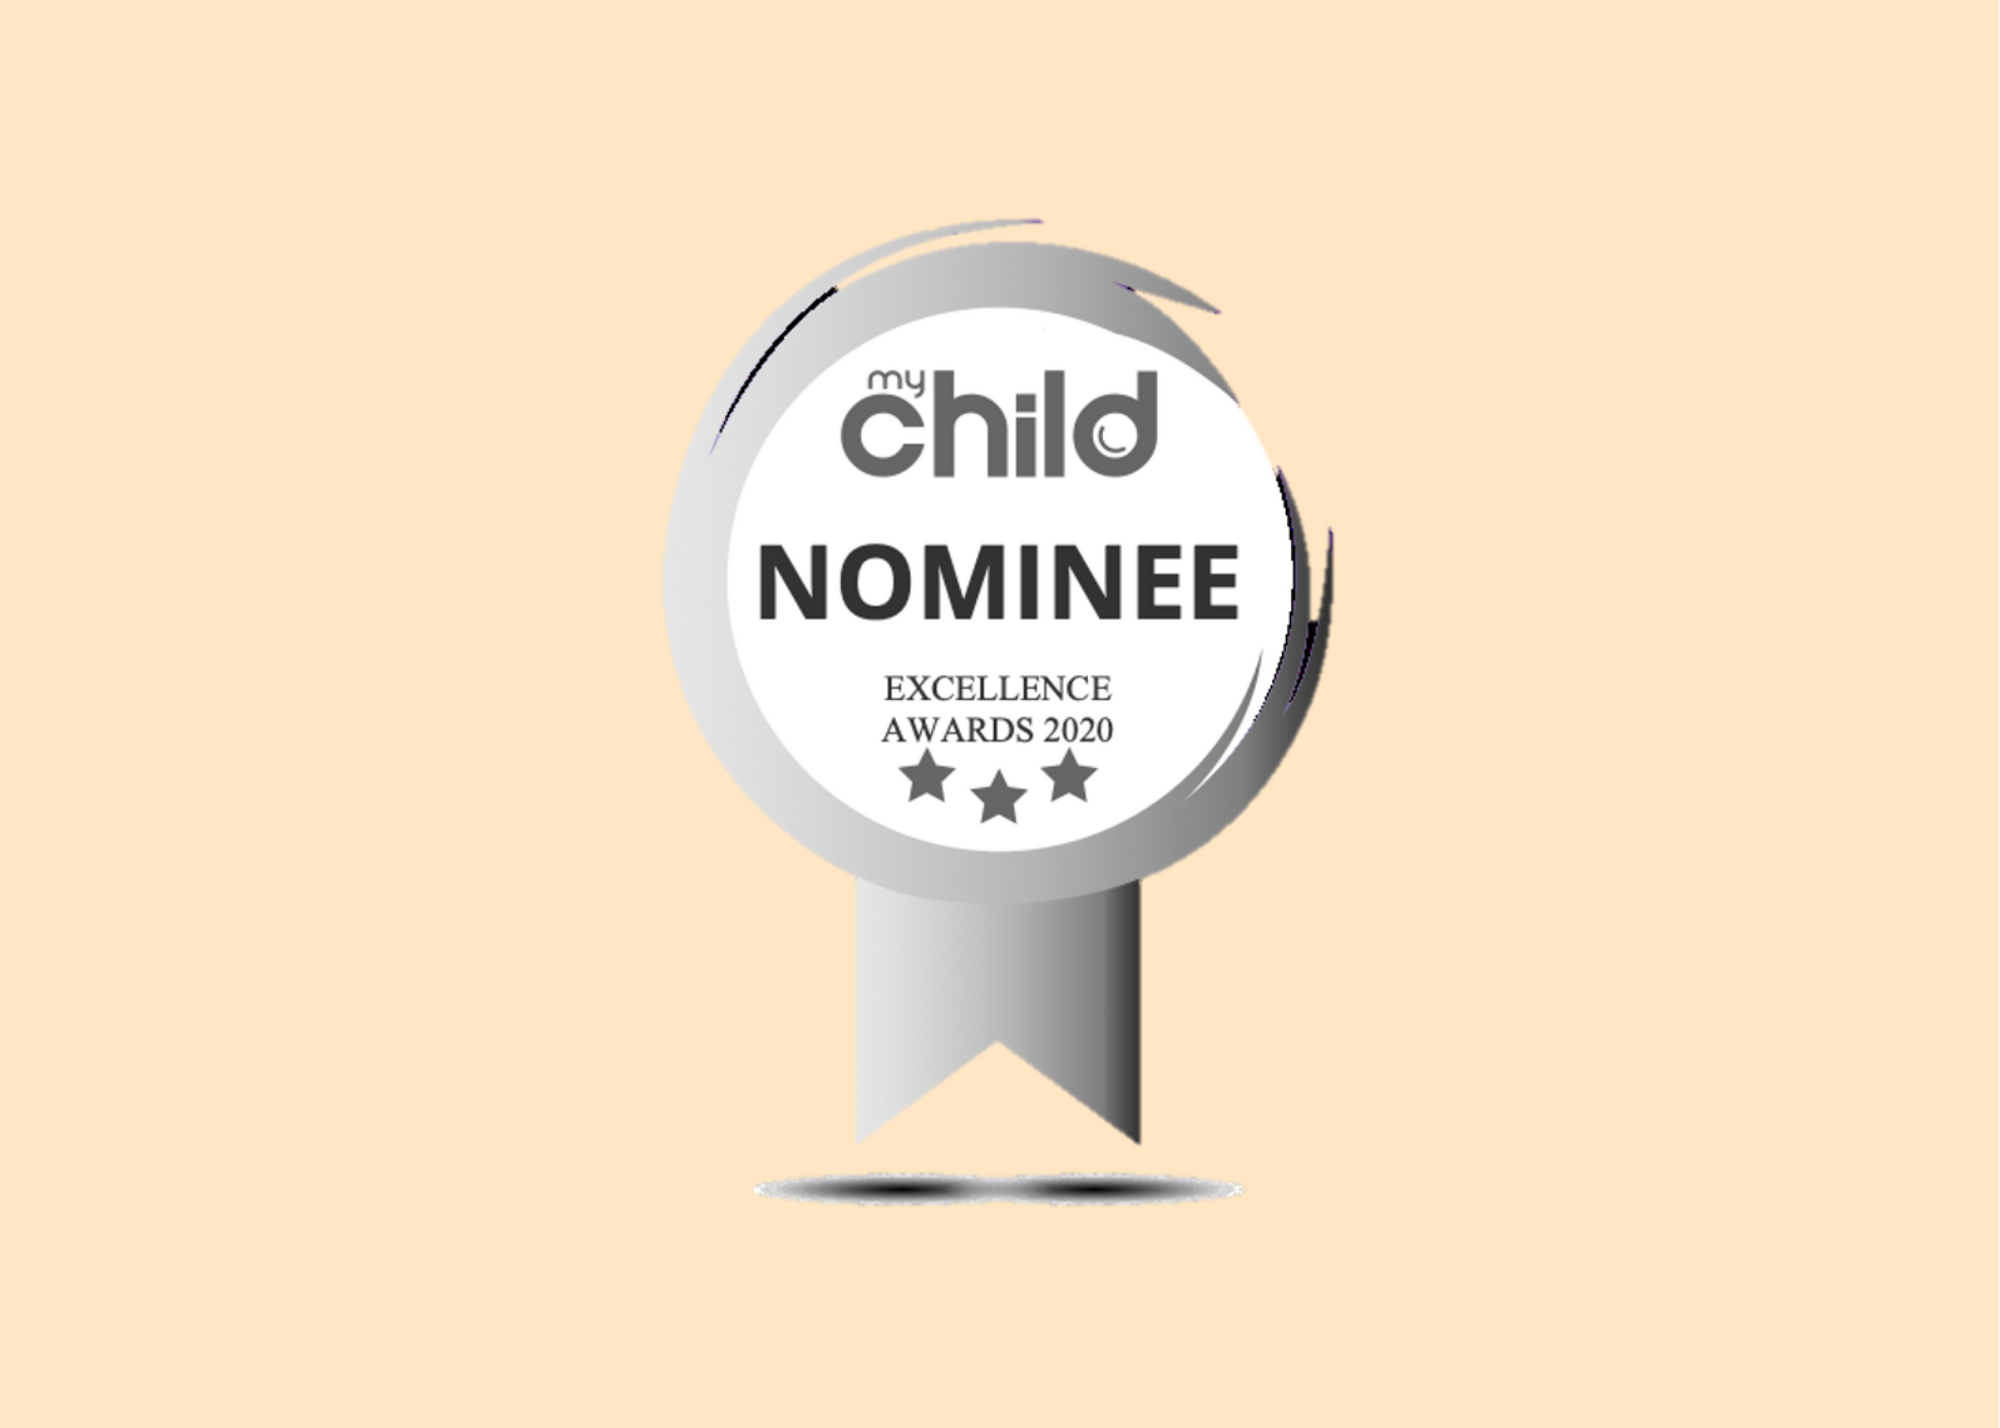 Mizzie Nominated for the MyChild Excellence Awards 2020!